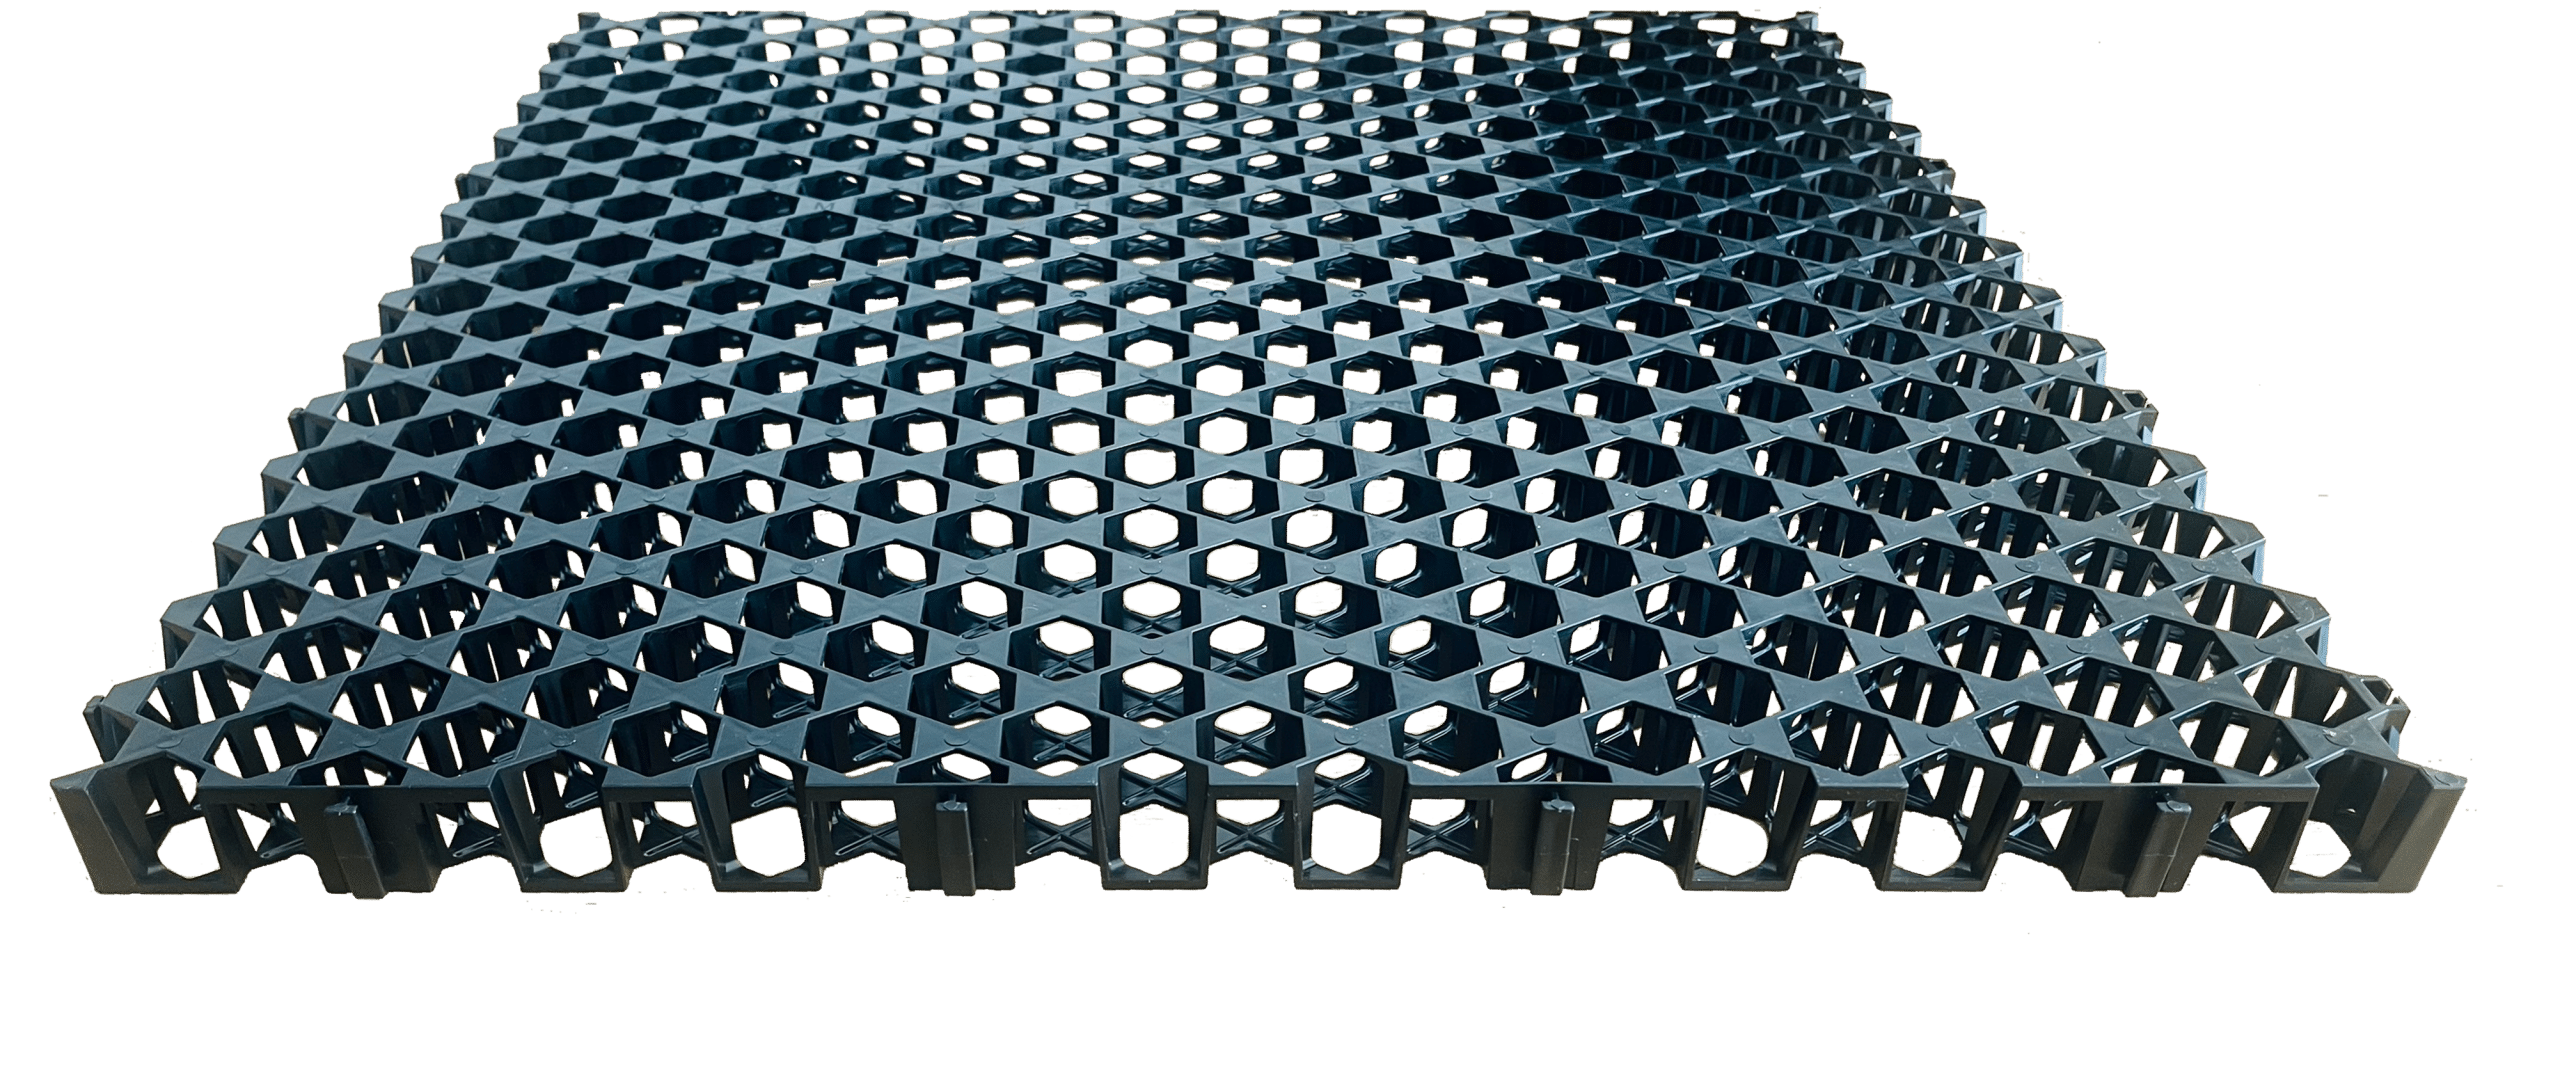 Ausdrain's new 30mm HexCell for drainage applications